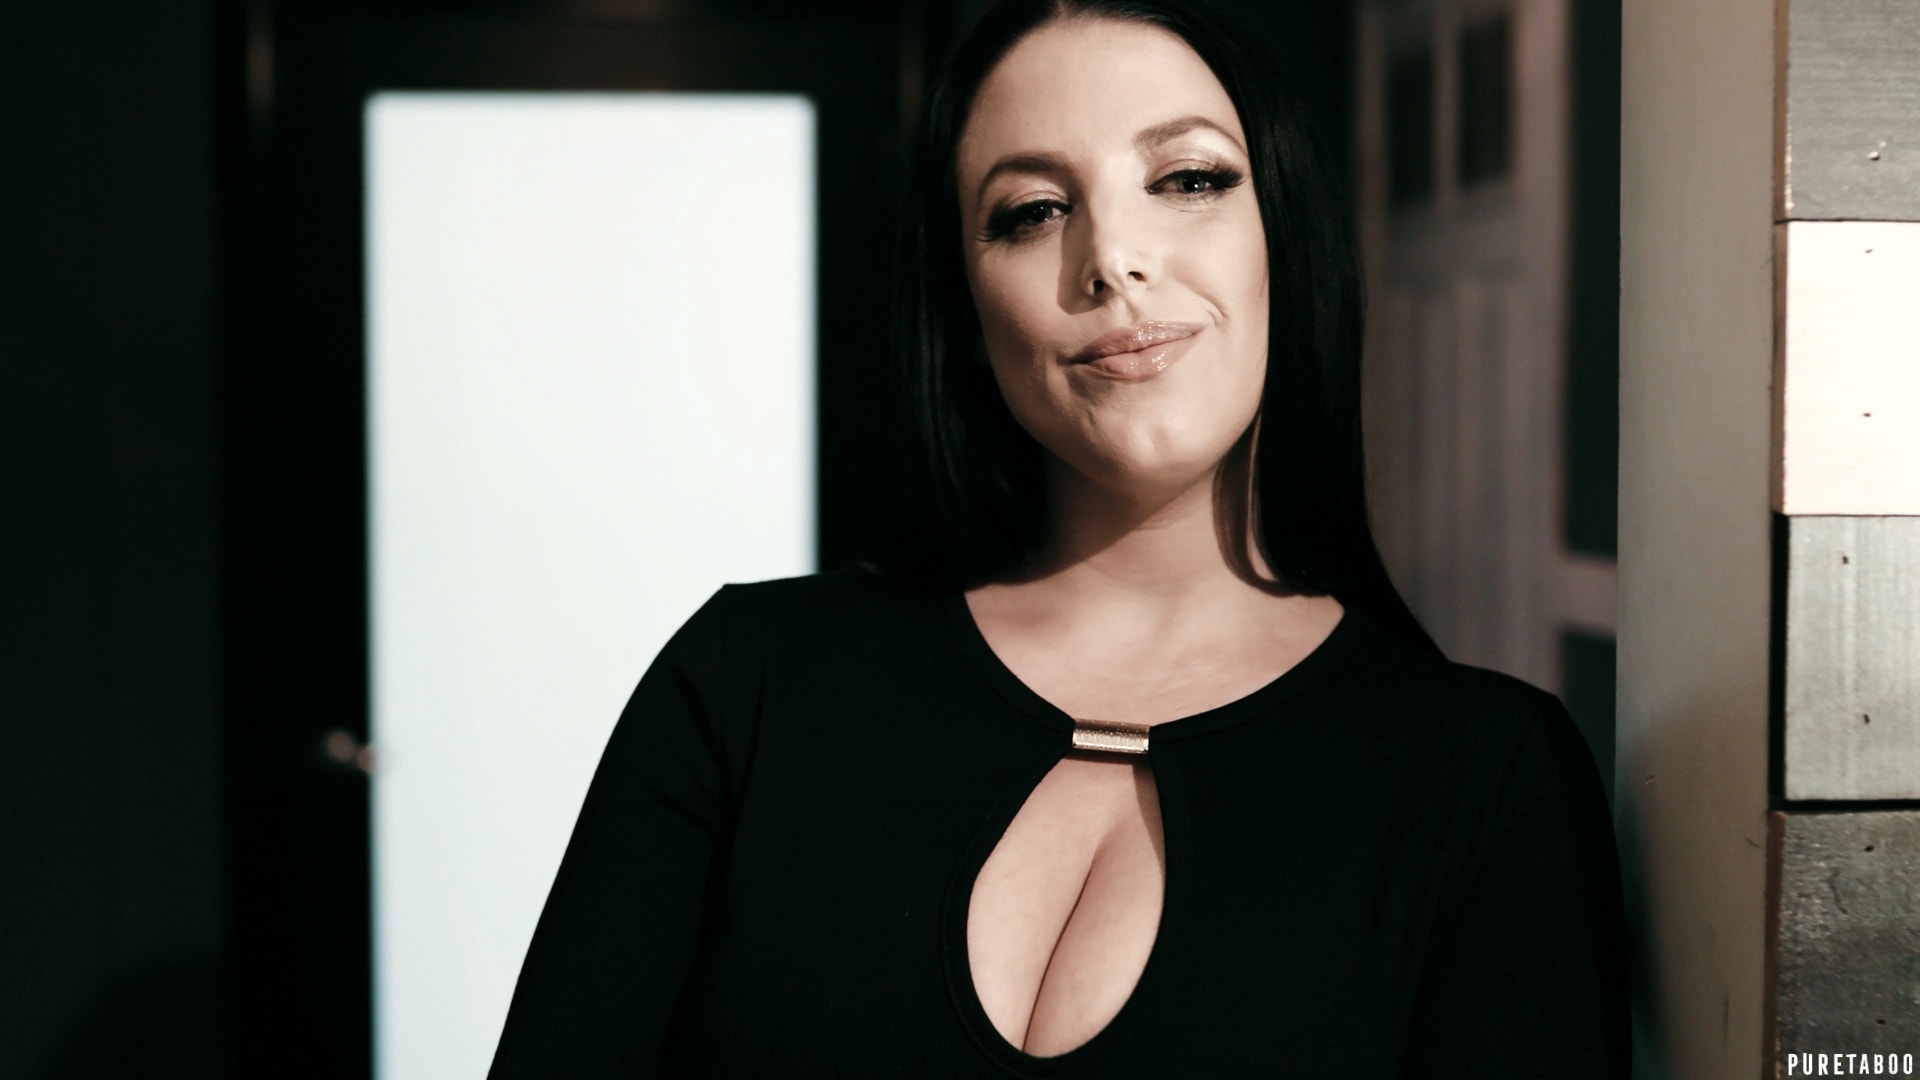 Angela White - Strings Attached | Picture (20)